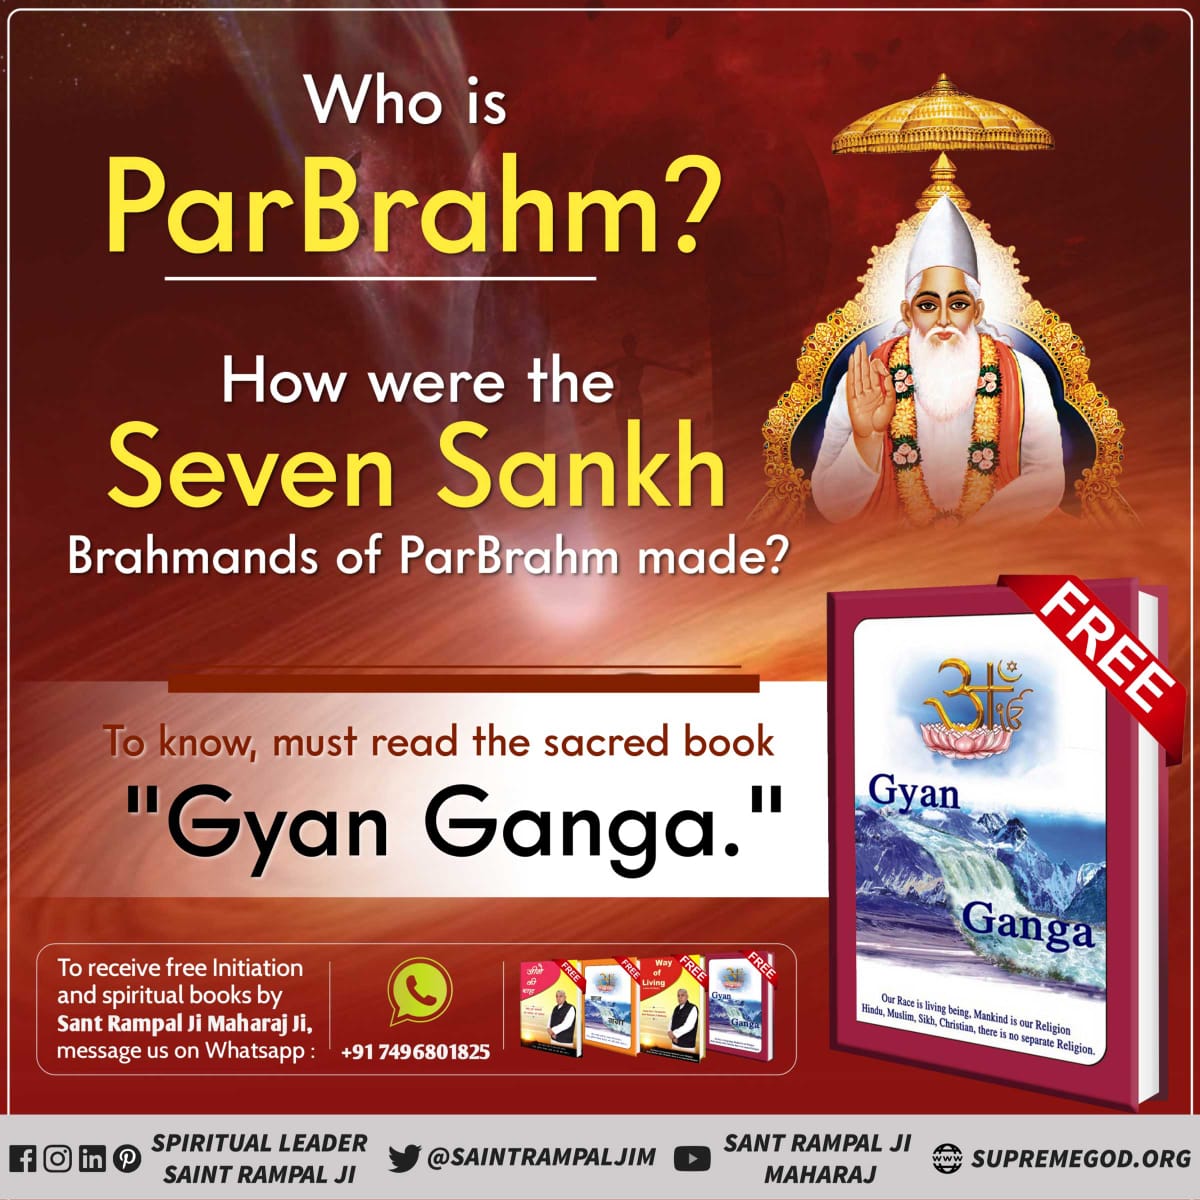 #GodMorningThrusday 💕☘️🌱💕☘️💕🌱💕☘️💕🌱☘️🌱☘️🌱☘️💕☘️
Who is ParBrahm.....?
How were the Seven Sankh Brahmands of ParBrahm made......?

👉👉To know, must read the sacred book 'Gyan Ganga.'📚📚
#SaintRampalJiQuotes